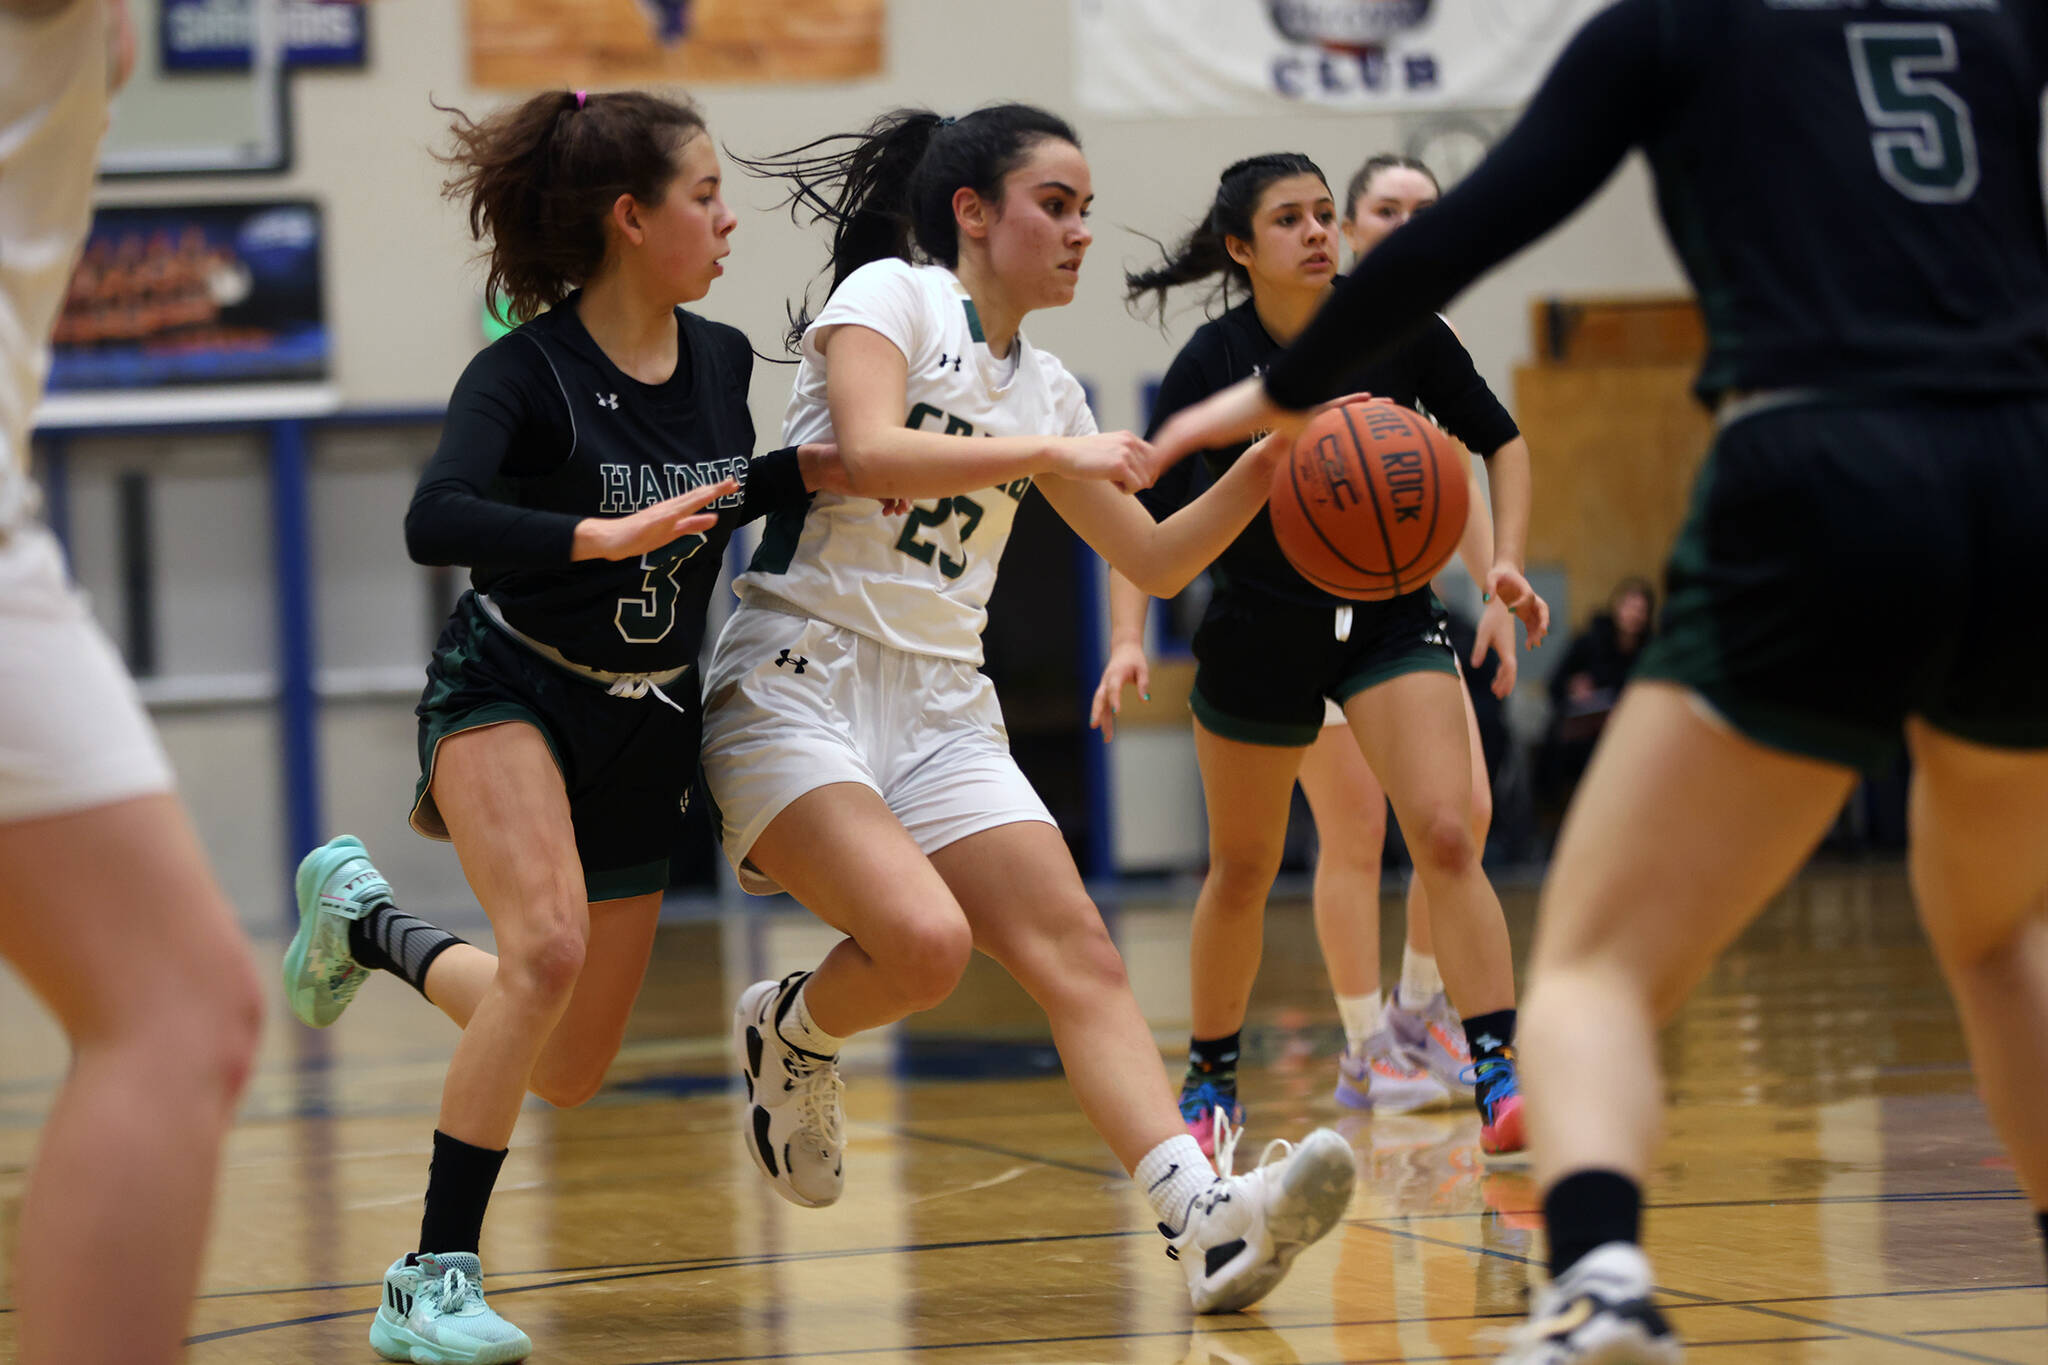 Craig senior Alexis Lawnicki (23) darts through the Haines defense during the second half of a Region V 2A Tournament game at Thunder Mountain High School in Juneau. Lawnicki made layups and sank free throws late that helped put the game away for Craig. (Ben Hohenstatt / Juneau Empire)